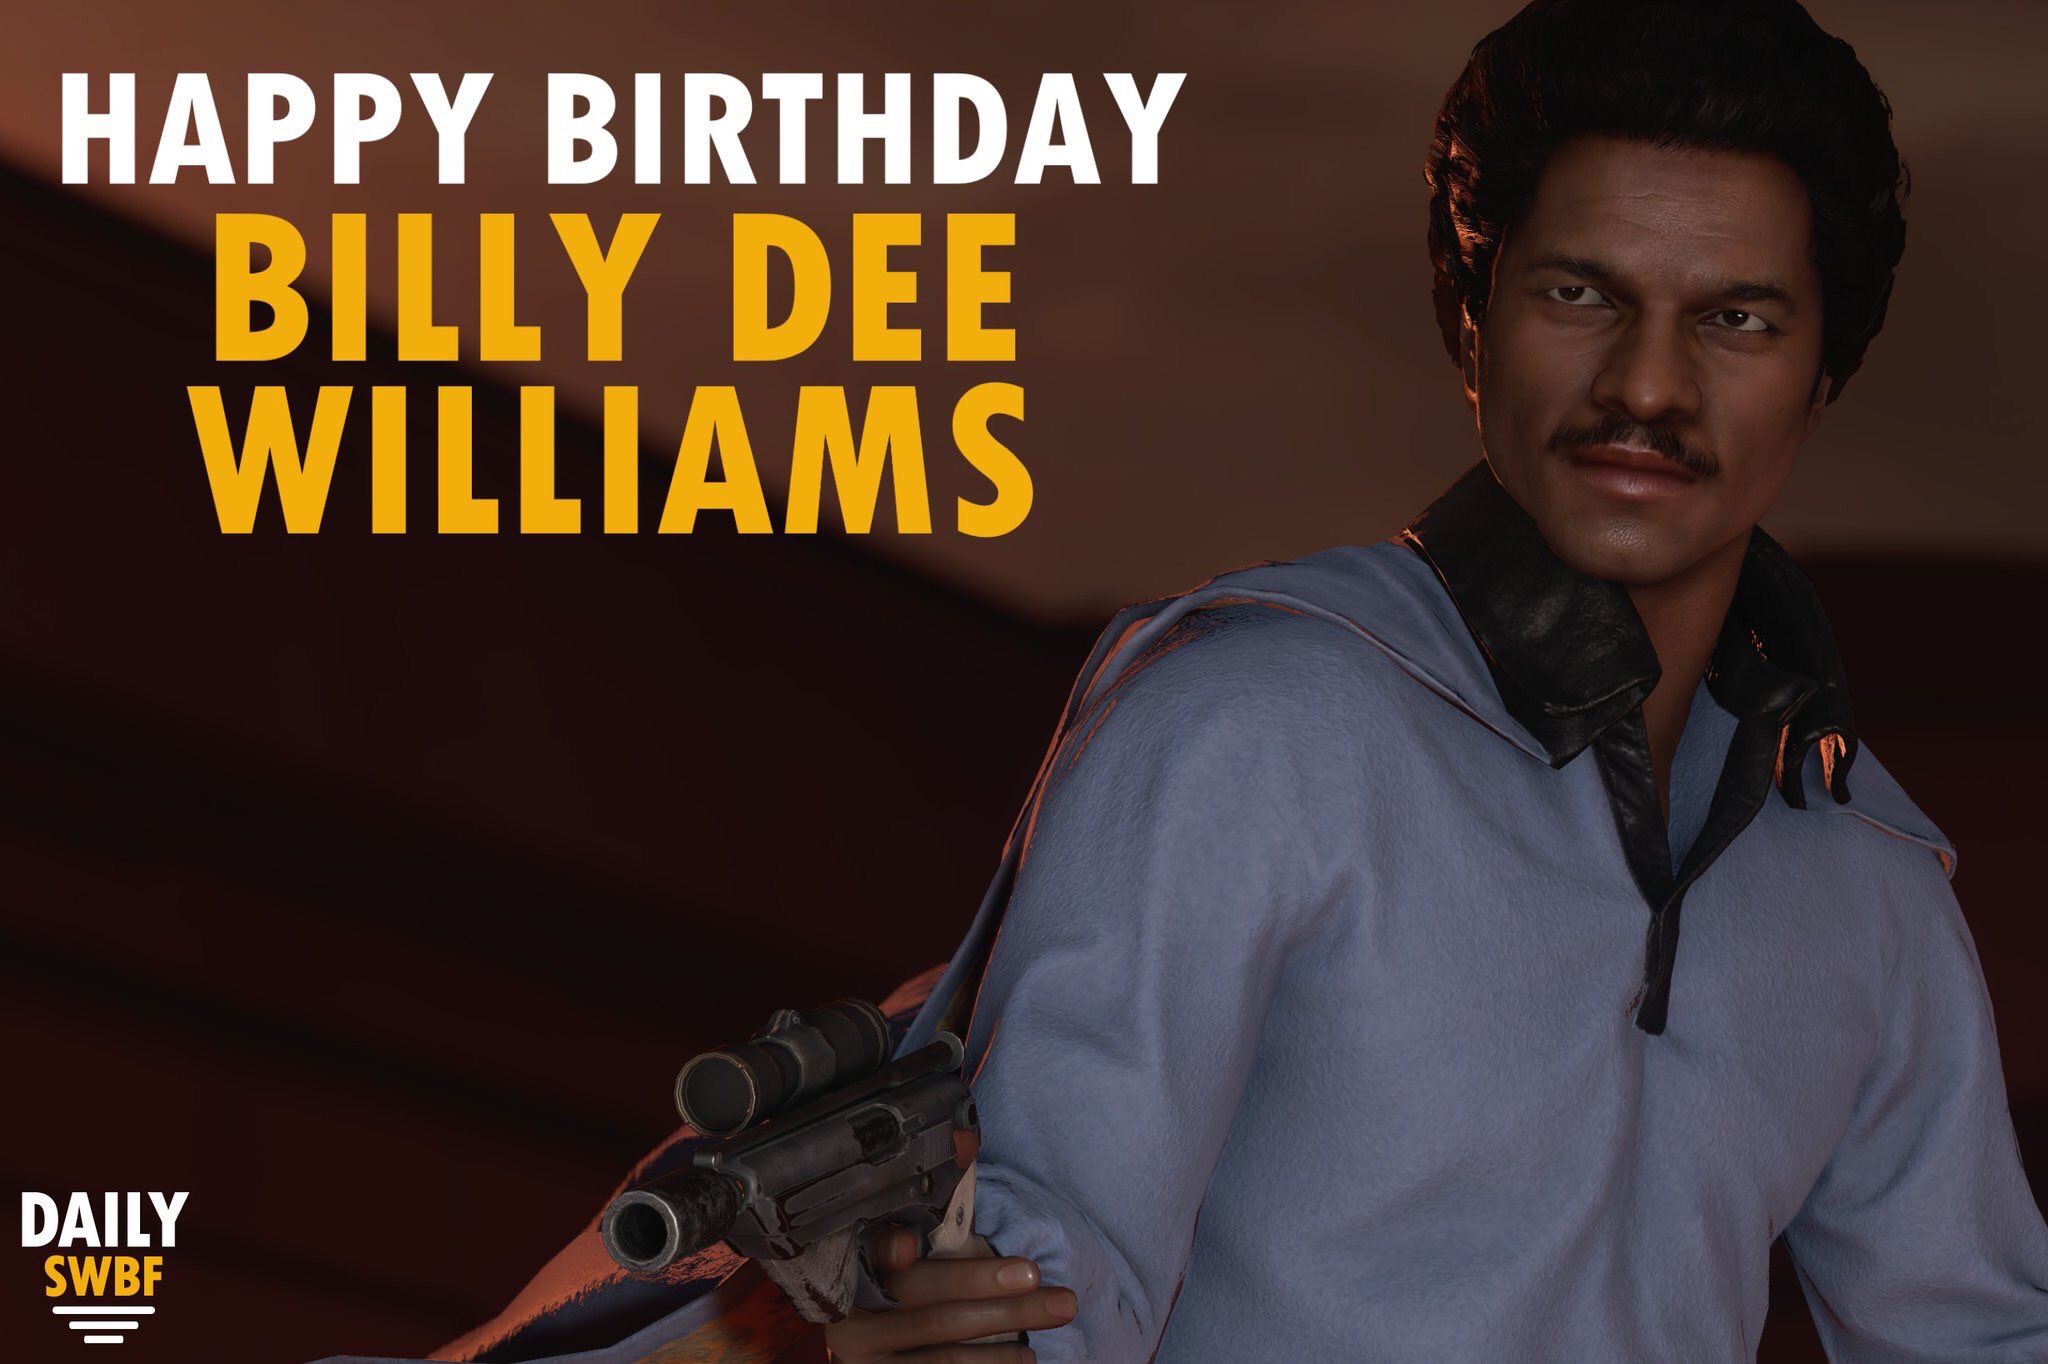 Happy Birthday to smoothest gambler in the galaxy, Billy Dee Williams! 